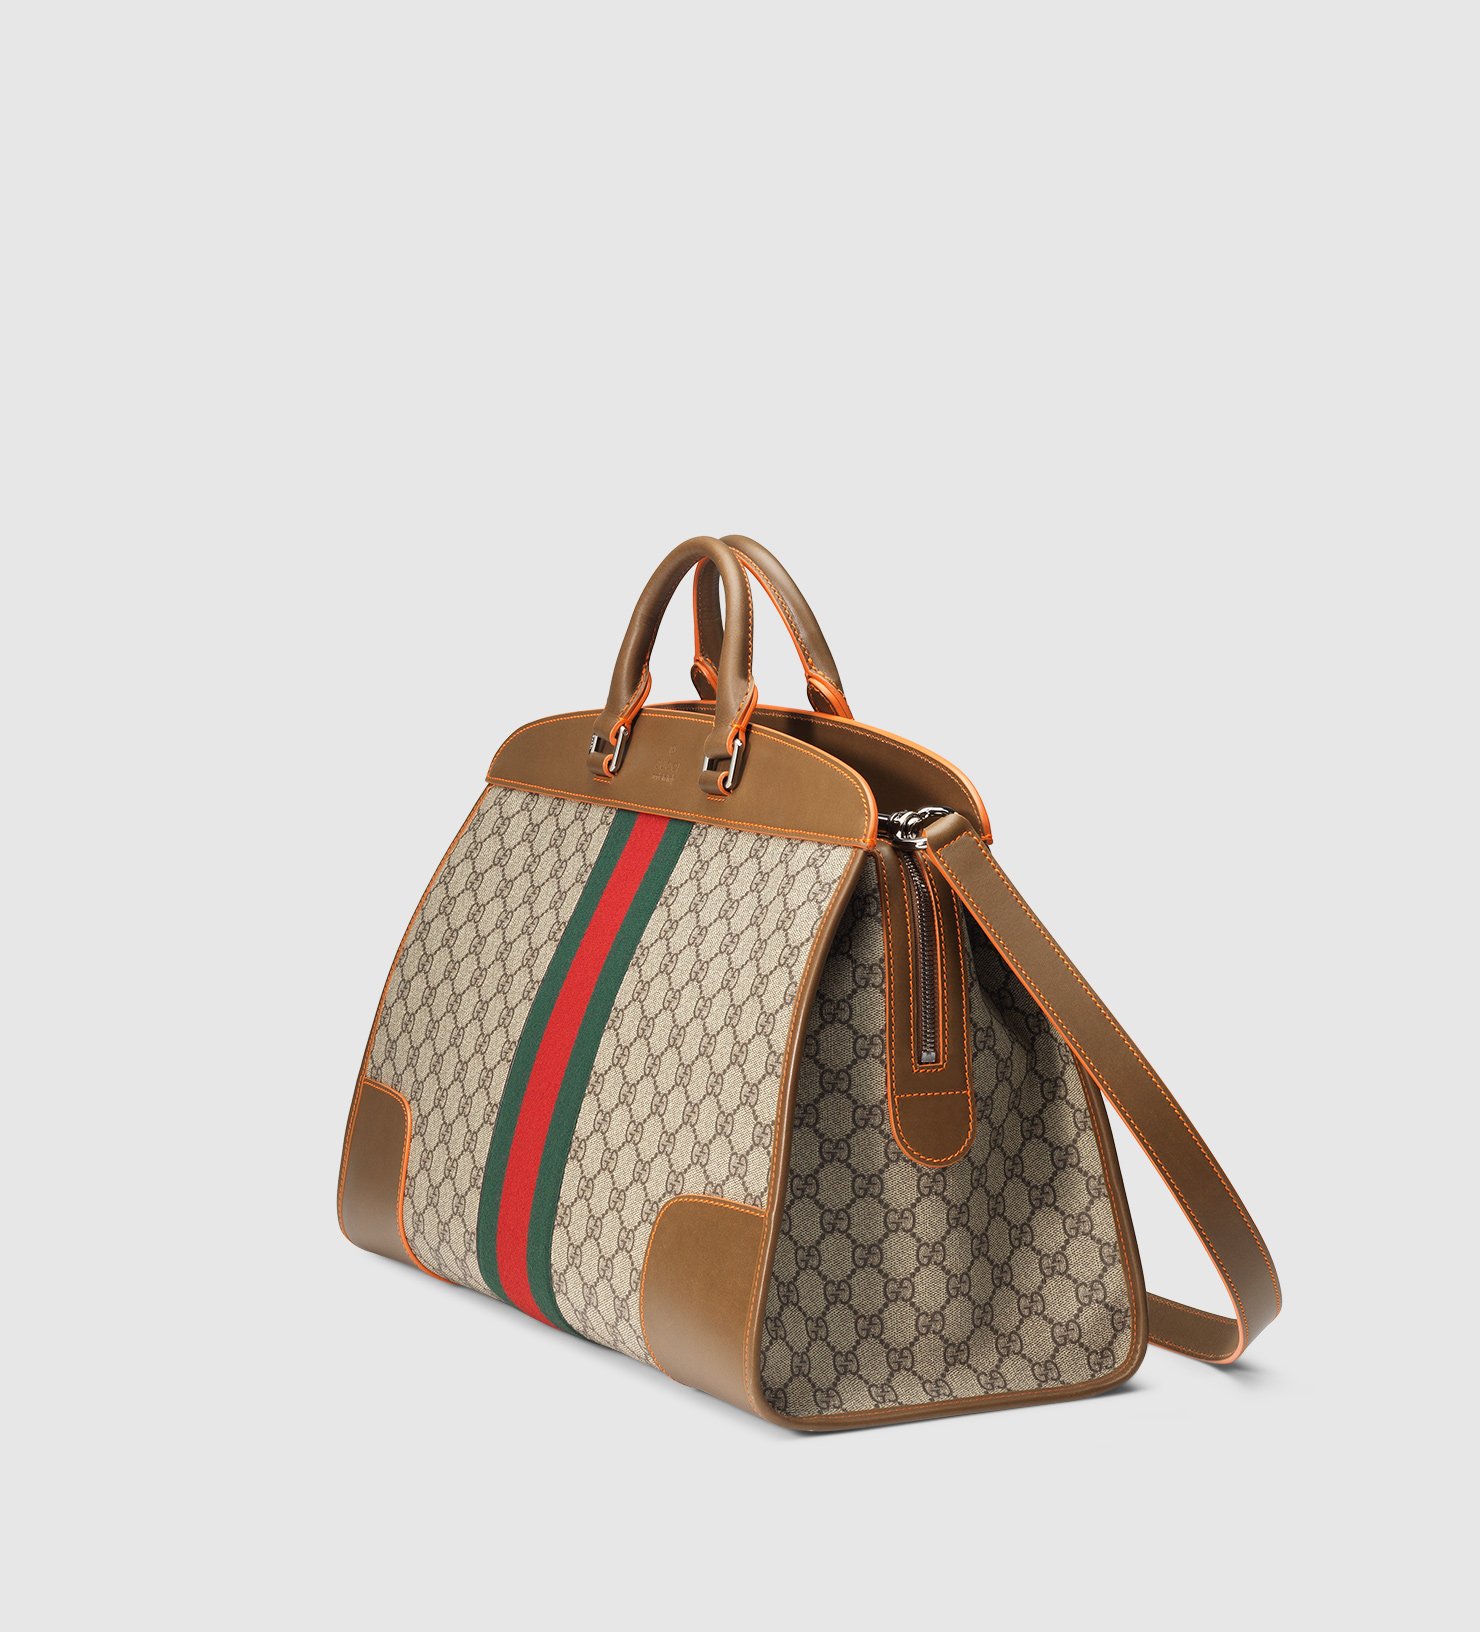 Gucci Supreme Canvas Duffle Bags | Confederated Tribes of the Umatilla Indian Reservation